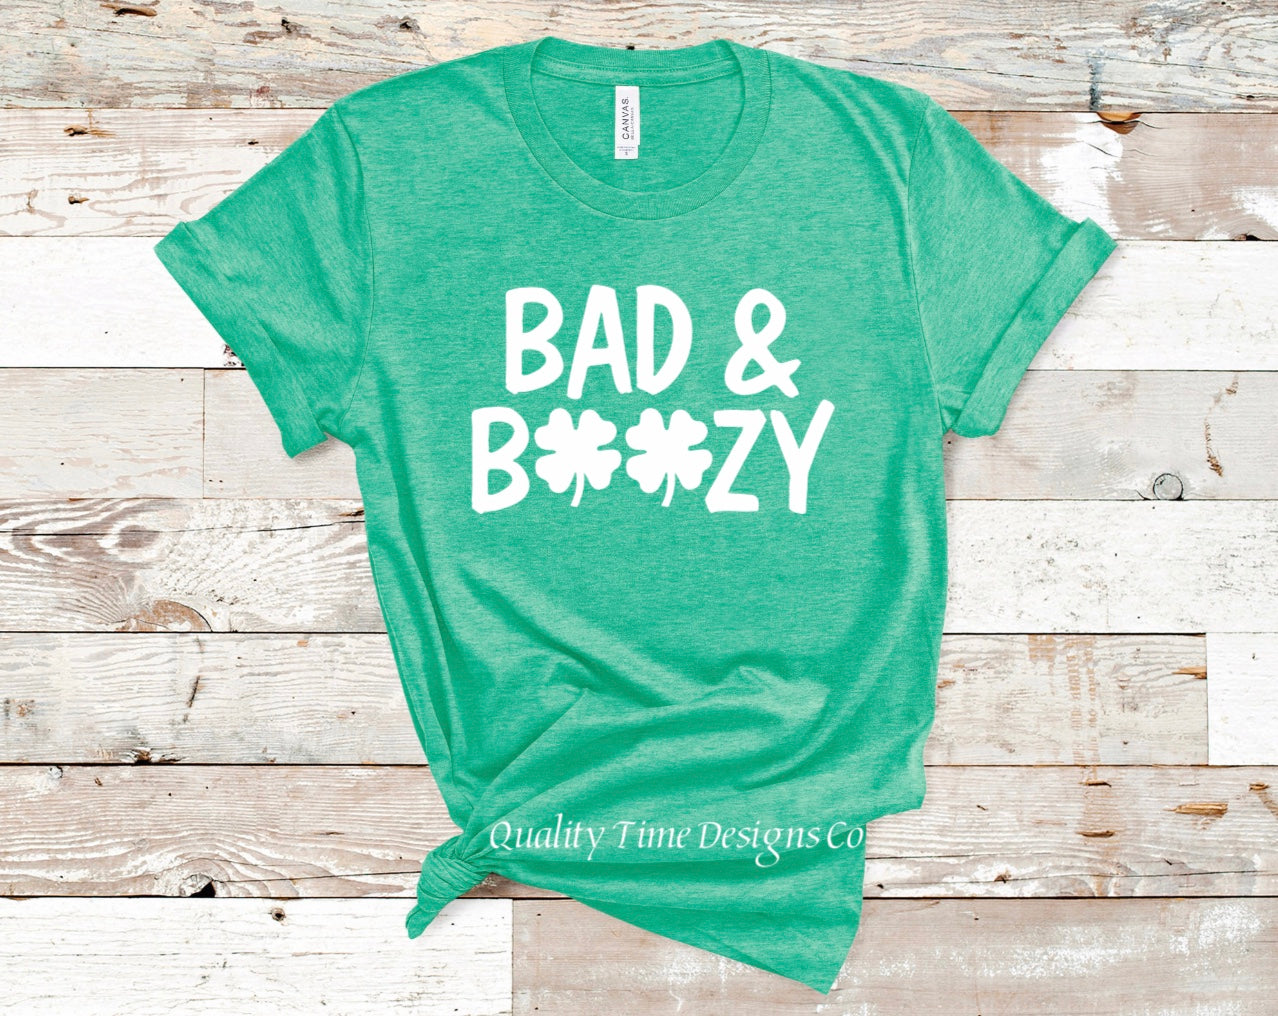 Bad and boozy st Patrick’s day green t shirt